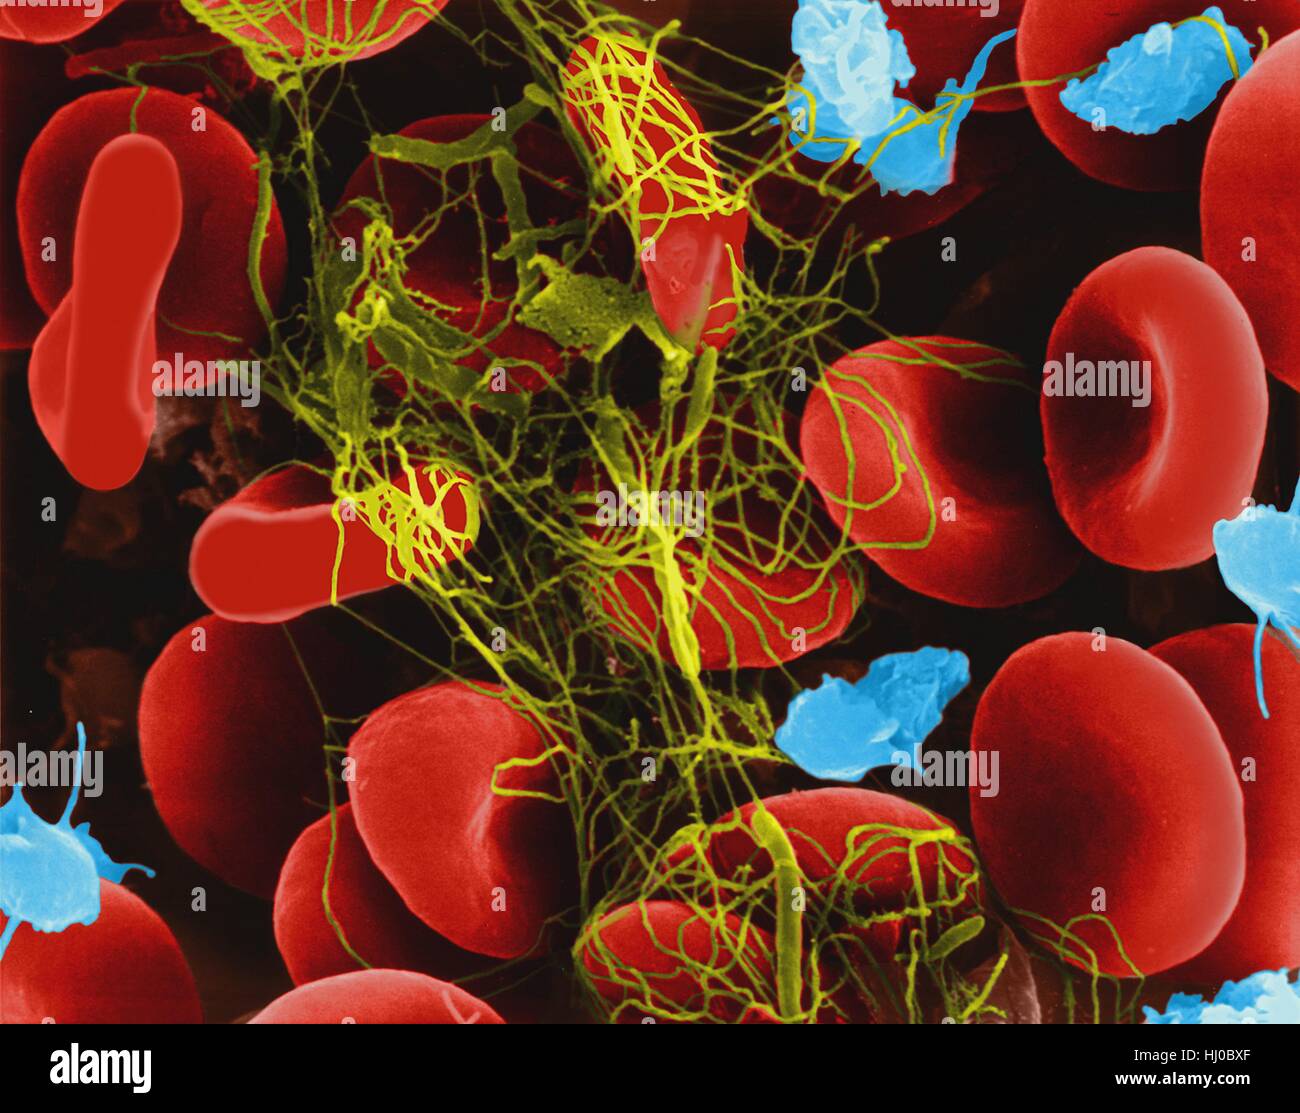 Human red blood cells trapped in fibrin blood clot,composite coloured scanning electron micrograph (SEM).Platelets in blood are small oval disks are termed nonactivated platelets or thrombocytes.Platelets serve as body's first line of defence to prevent excessive blood loss.When injury such as cut Stock Photo